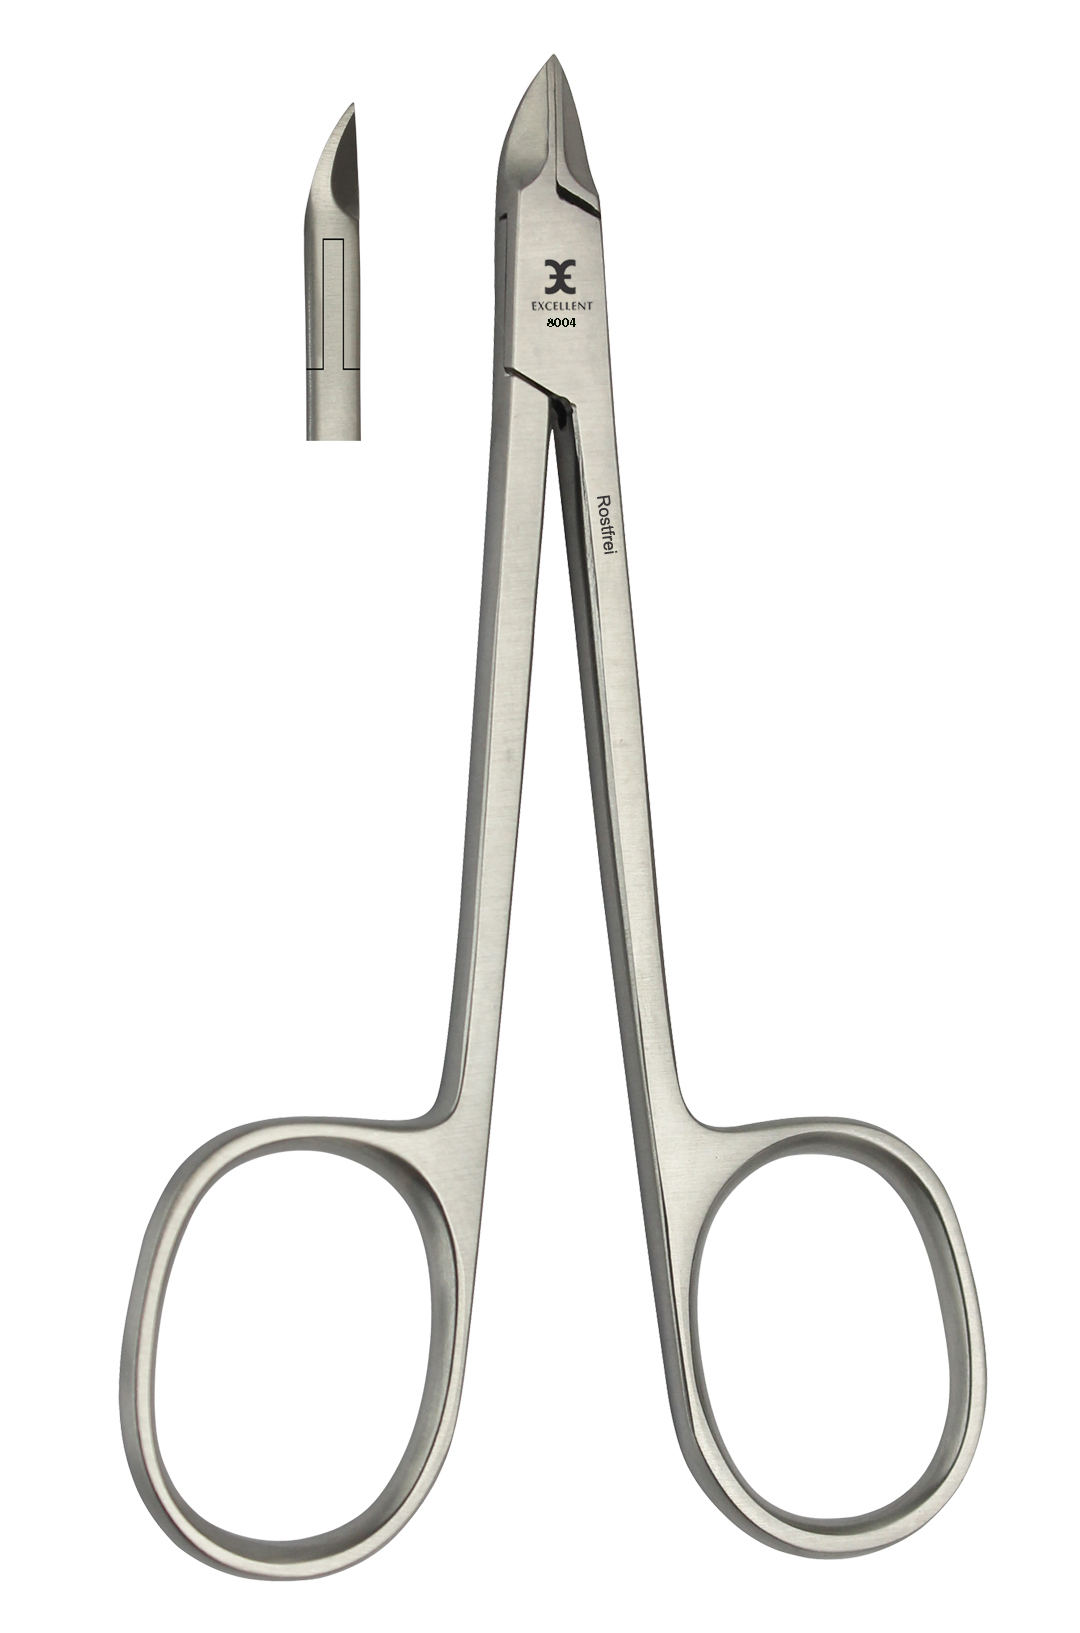 Excellent eye forceps 8.5 cm especially for intermediate treatment